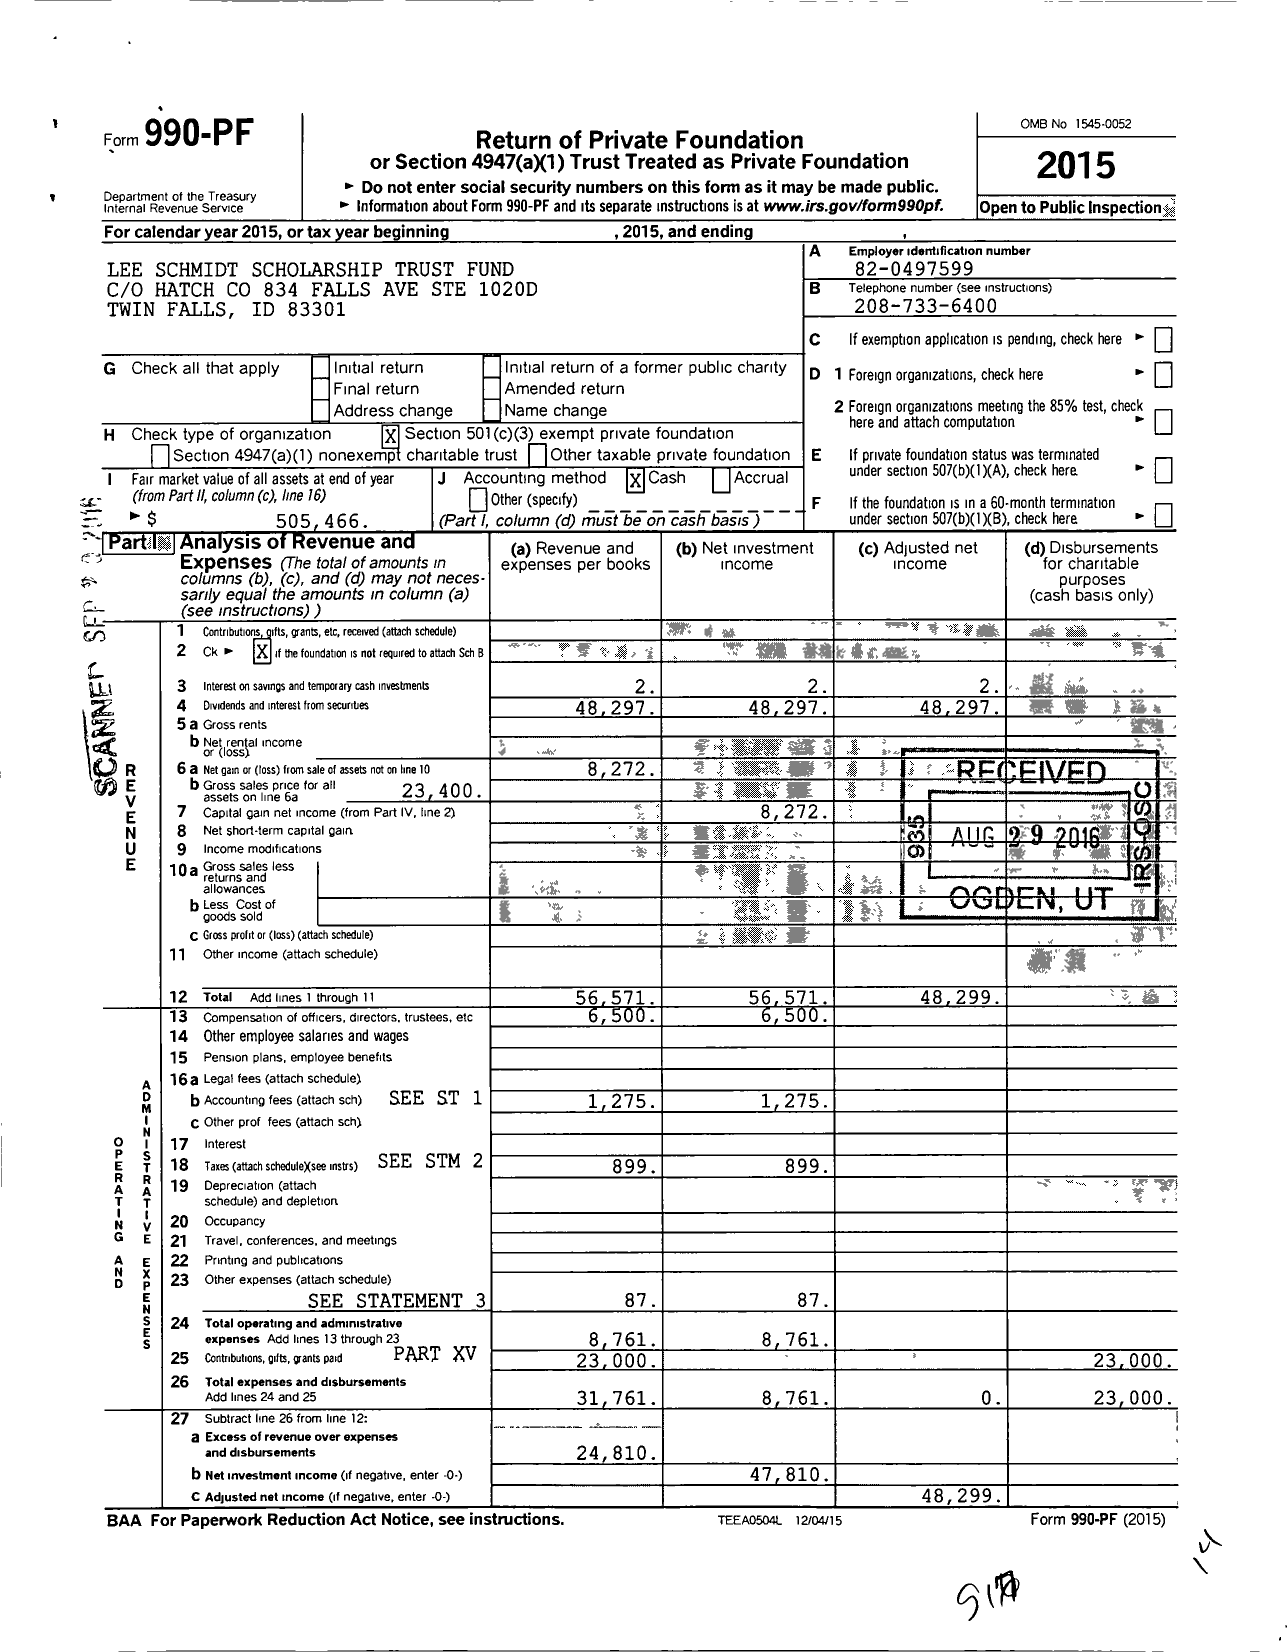 Image of first page of 2015 Form 990PF for Lee Schmidt Scholarship Trust Fund